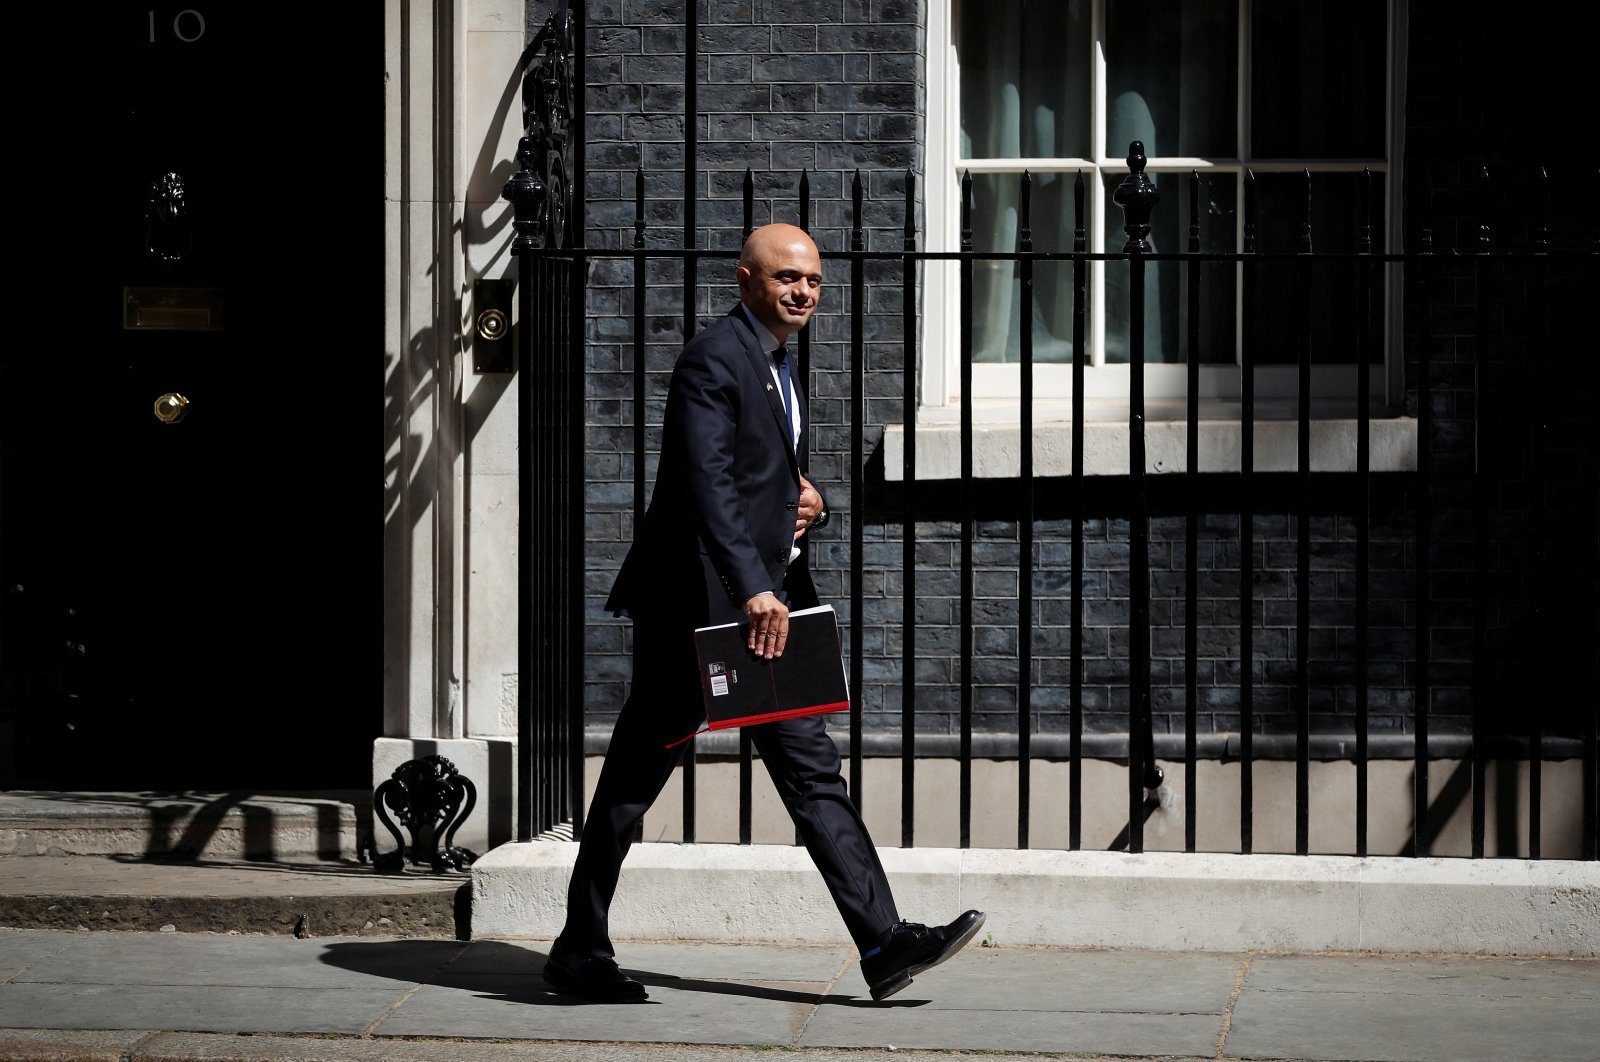 Former British Secretary of State for Health & Social Care Sajid Javid leaves after a weekly Cabinet meeting at 10 Downing Street, London, U.K., July 5, 2022. (Reuters Photo)